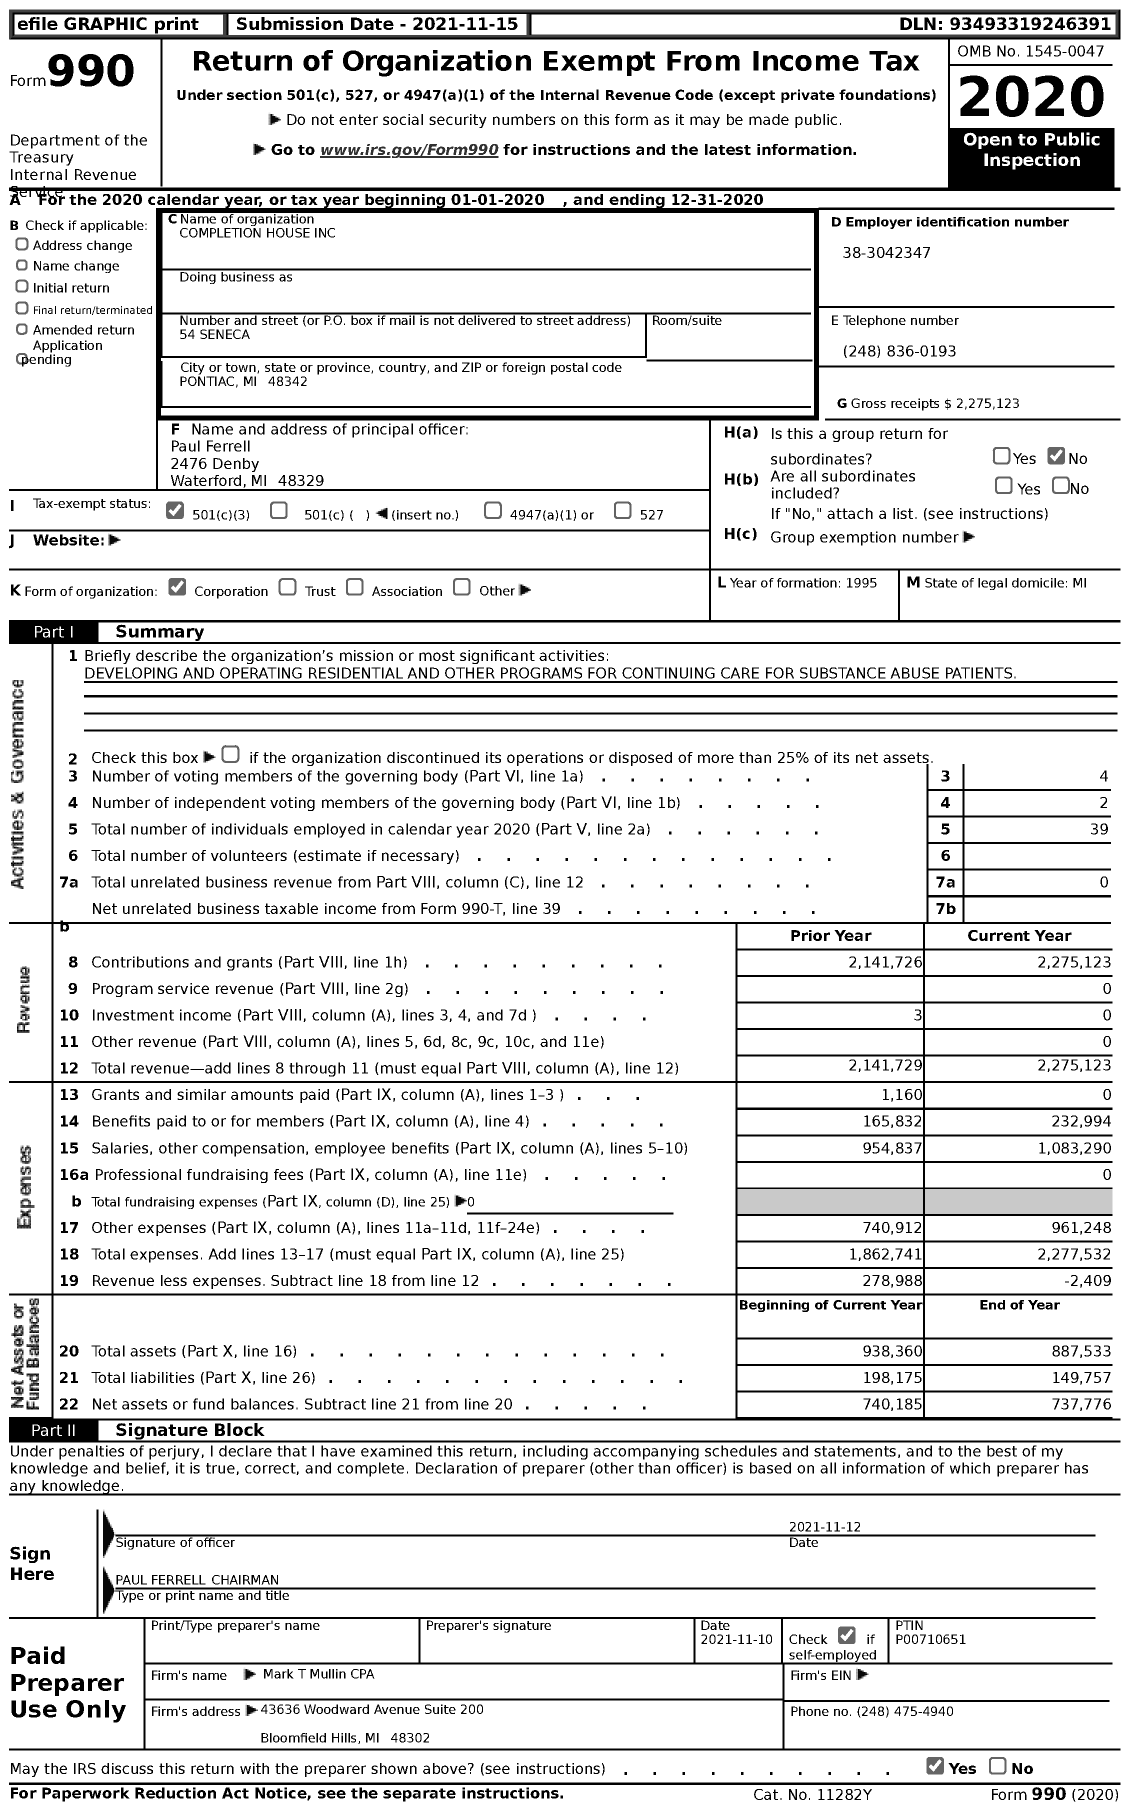 Image of first page of 2020 Form 990 for Completion House